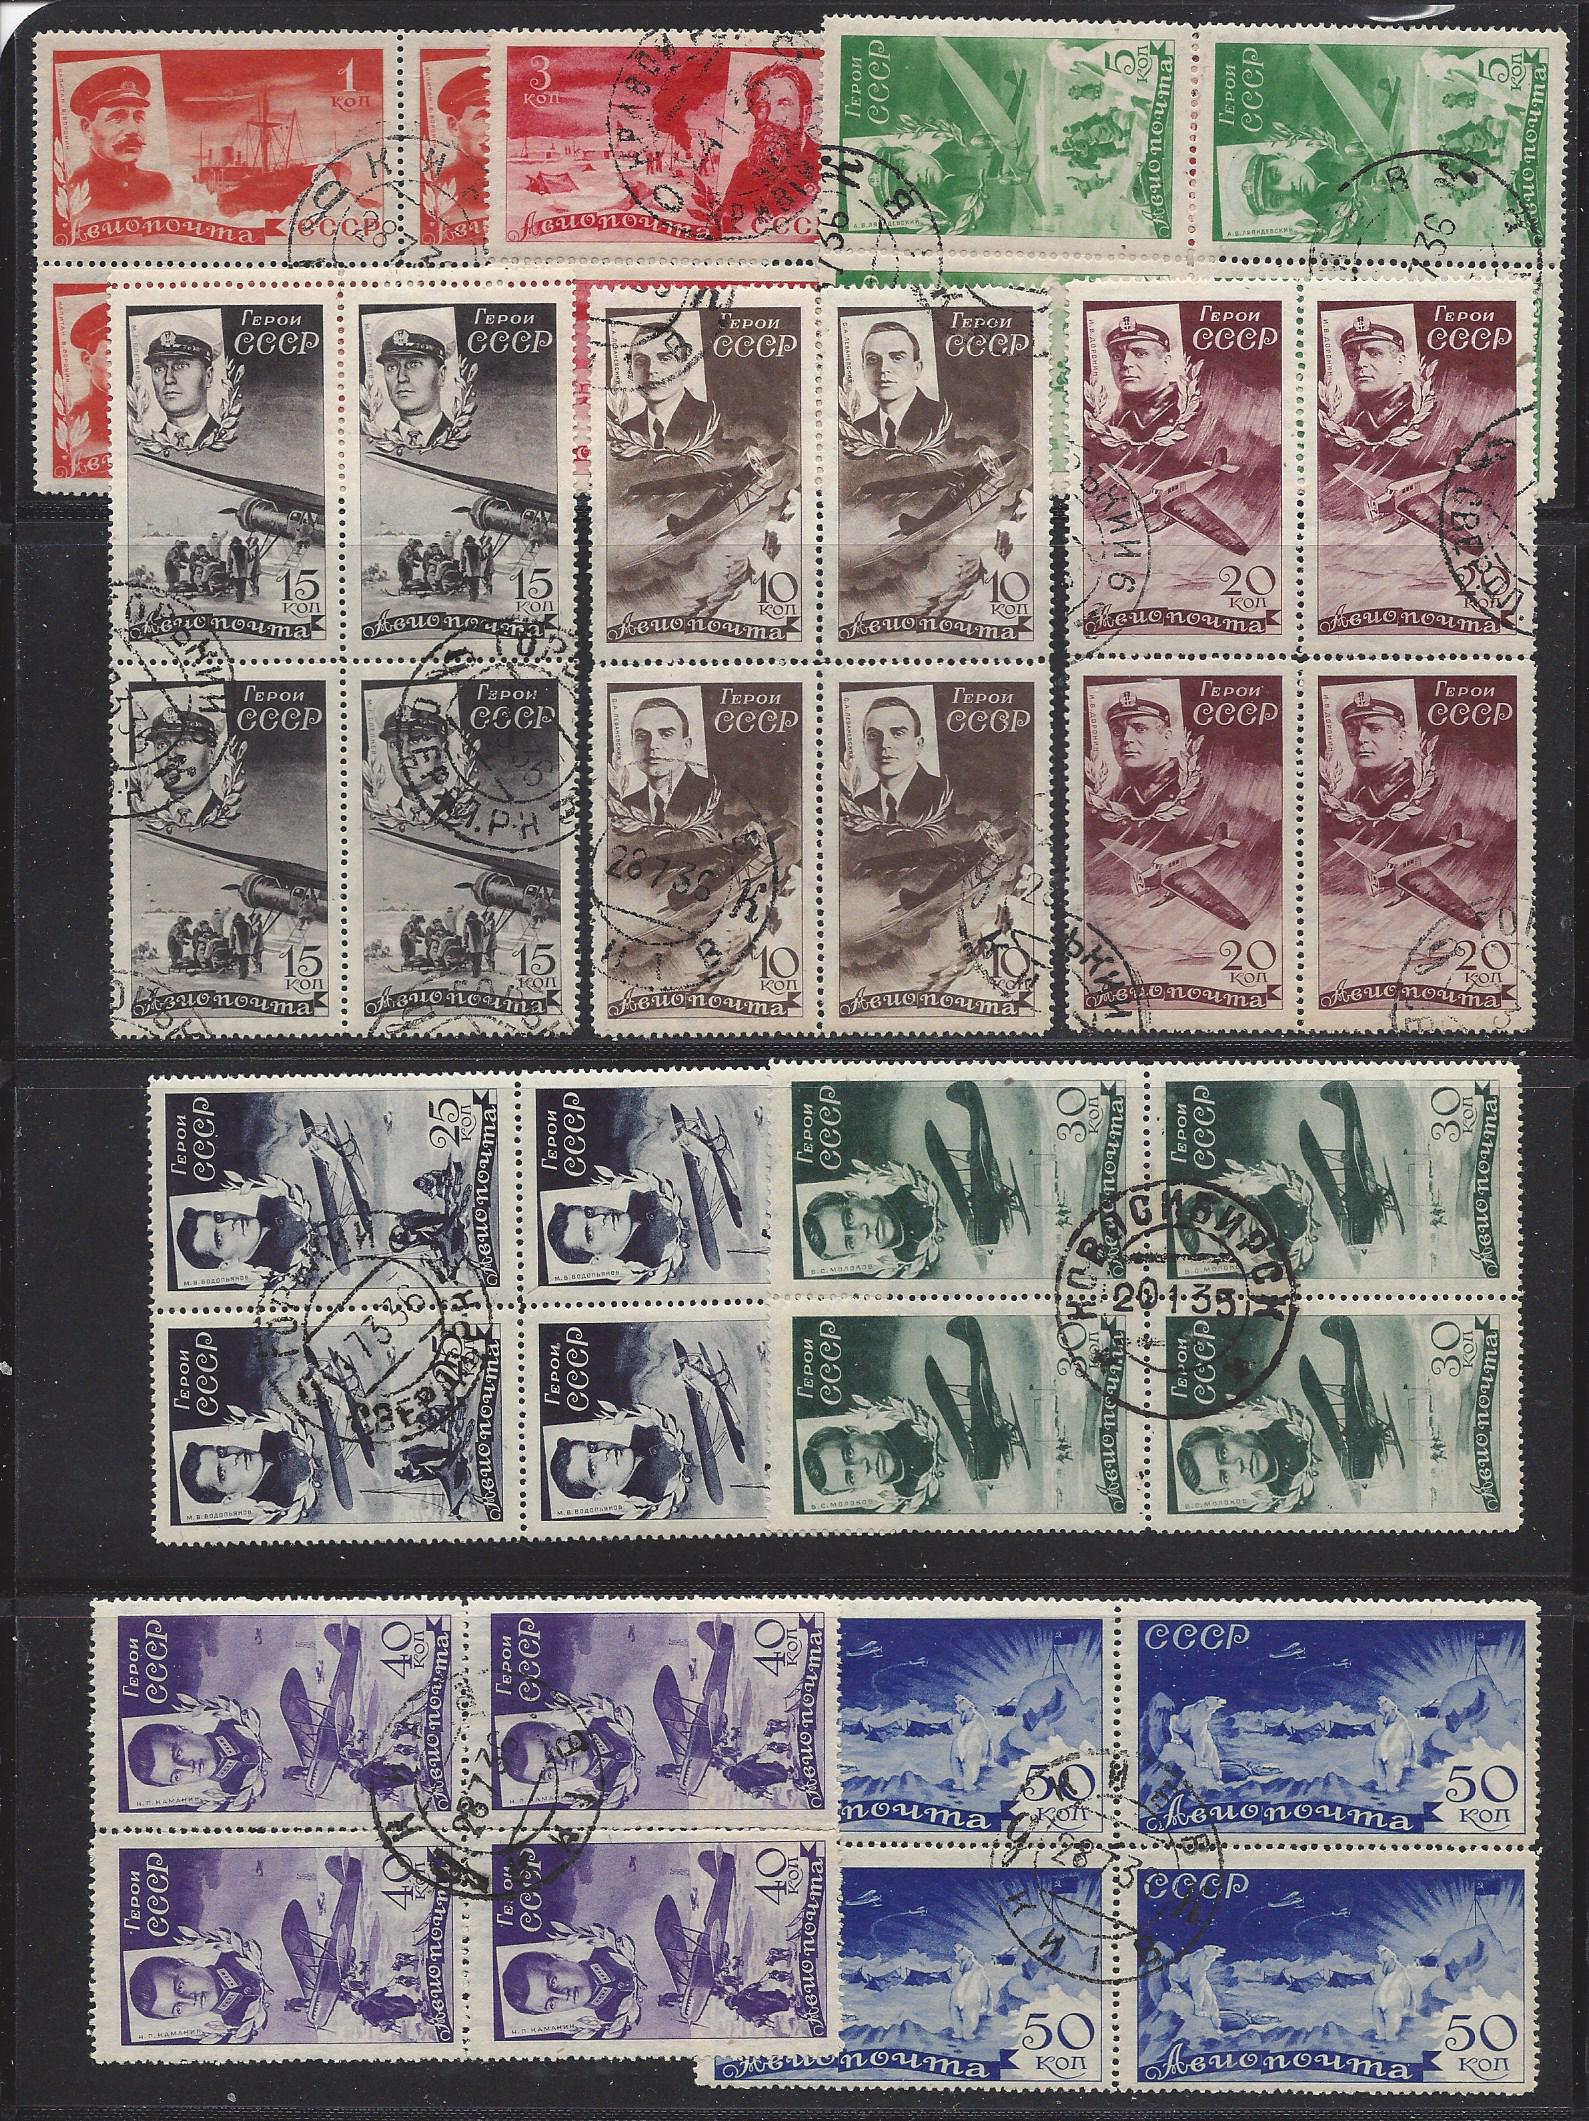 Russia Specialized - Airmail & Special Delivery Cheliuskin issue Scott C58-67 Michel 499-508 